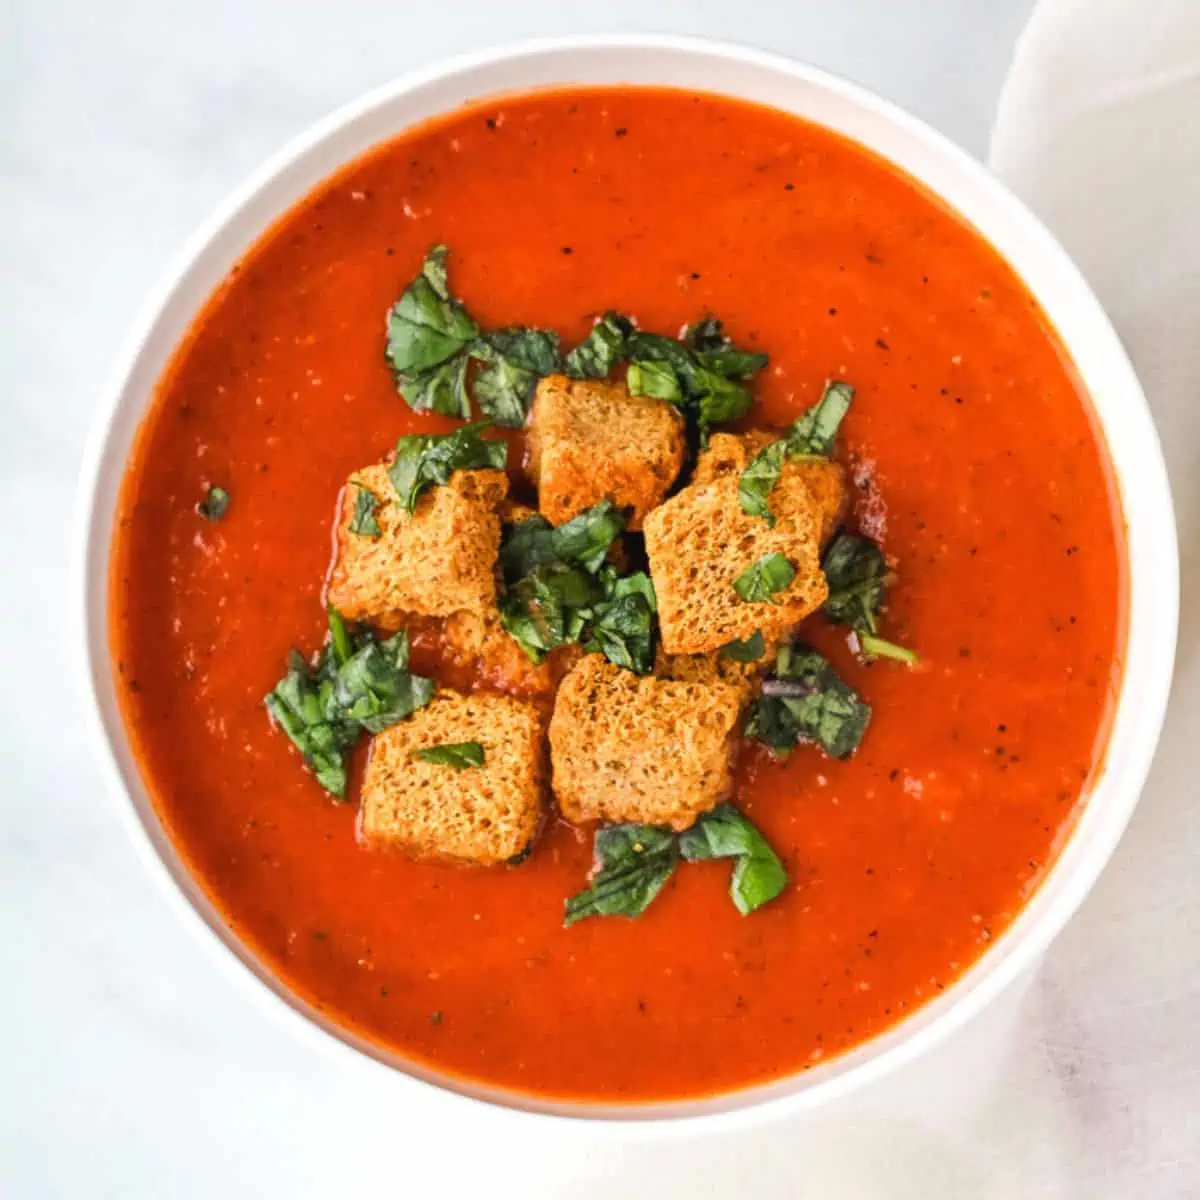 Bowl of creamy vegan tomato soup with croutons and fresh herbs.
